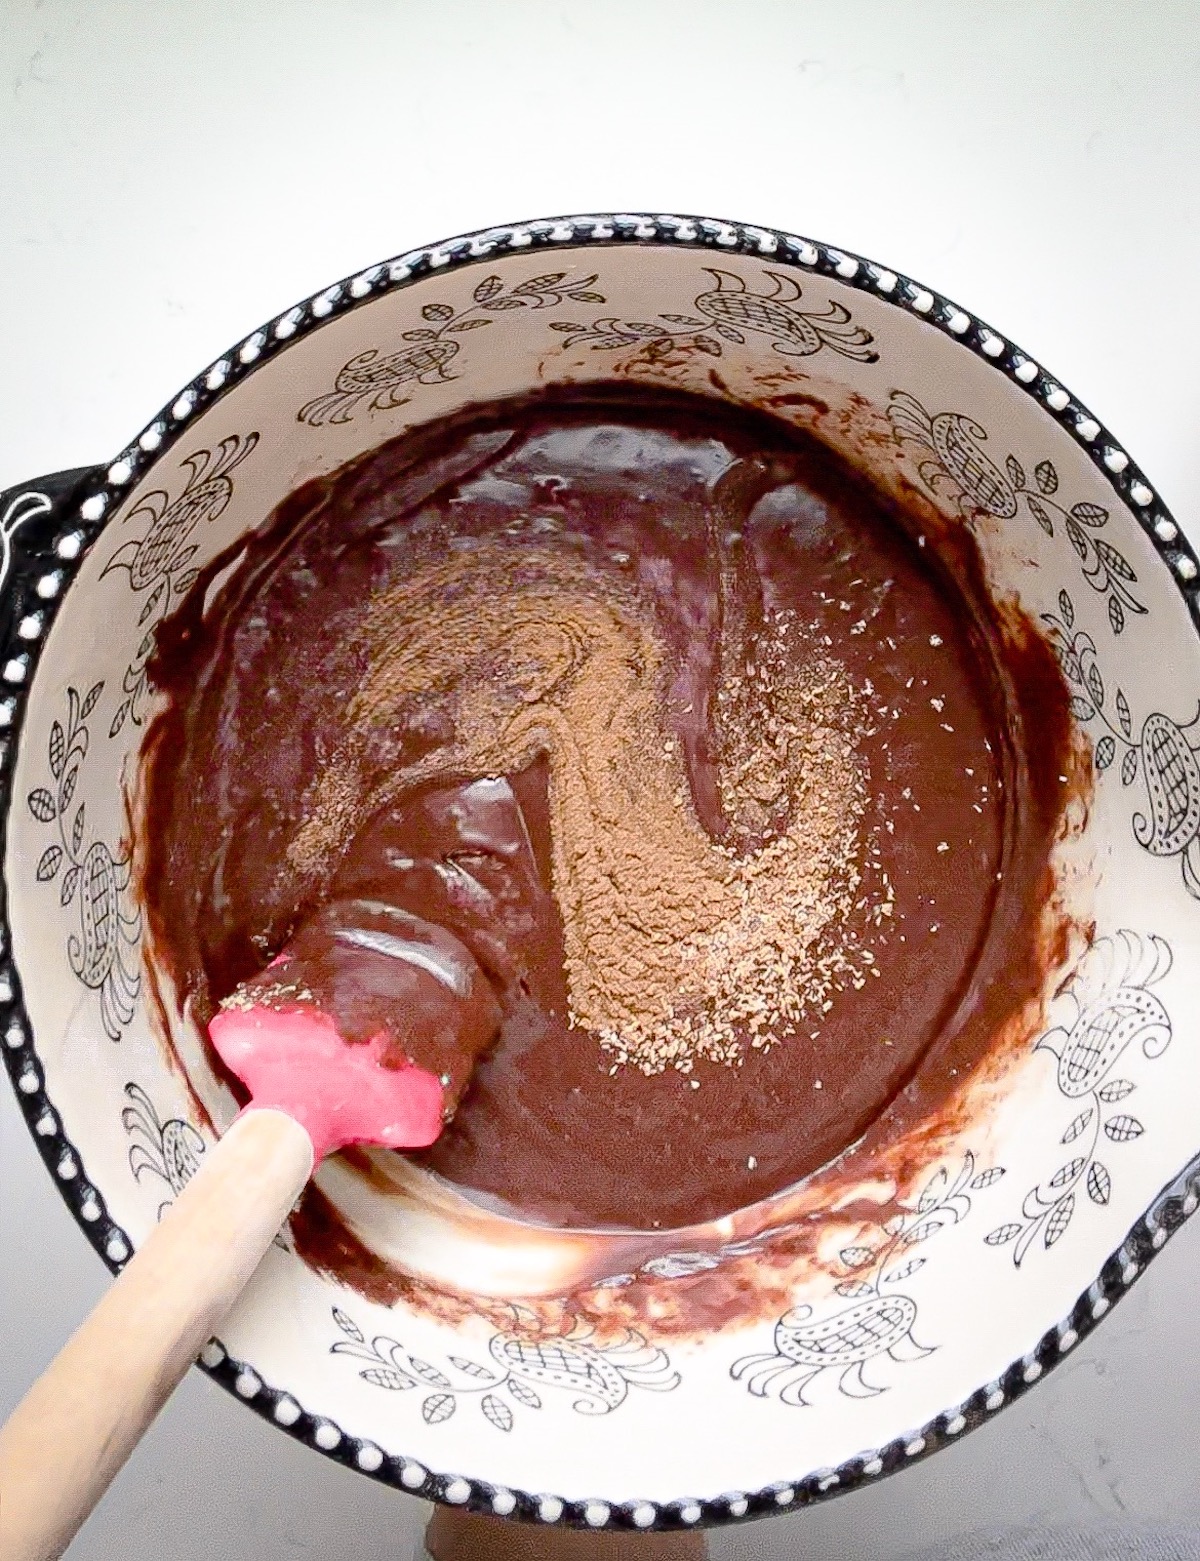 melted chocolate, condensed coconut milk, spices, and salt in a large mixing bowl